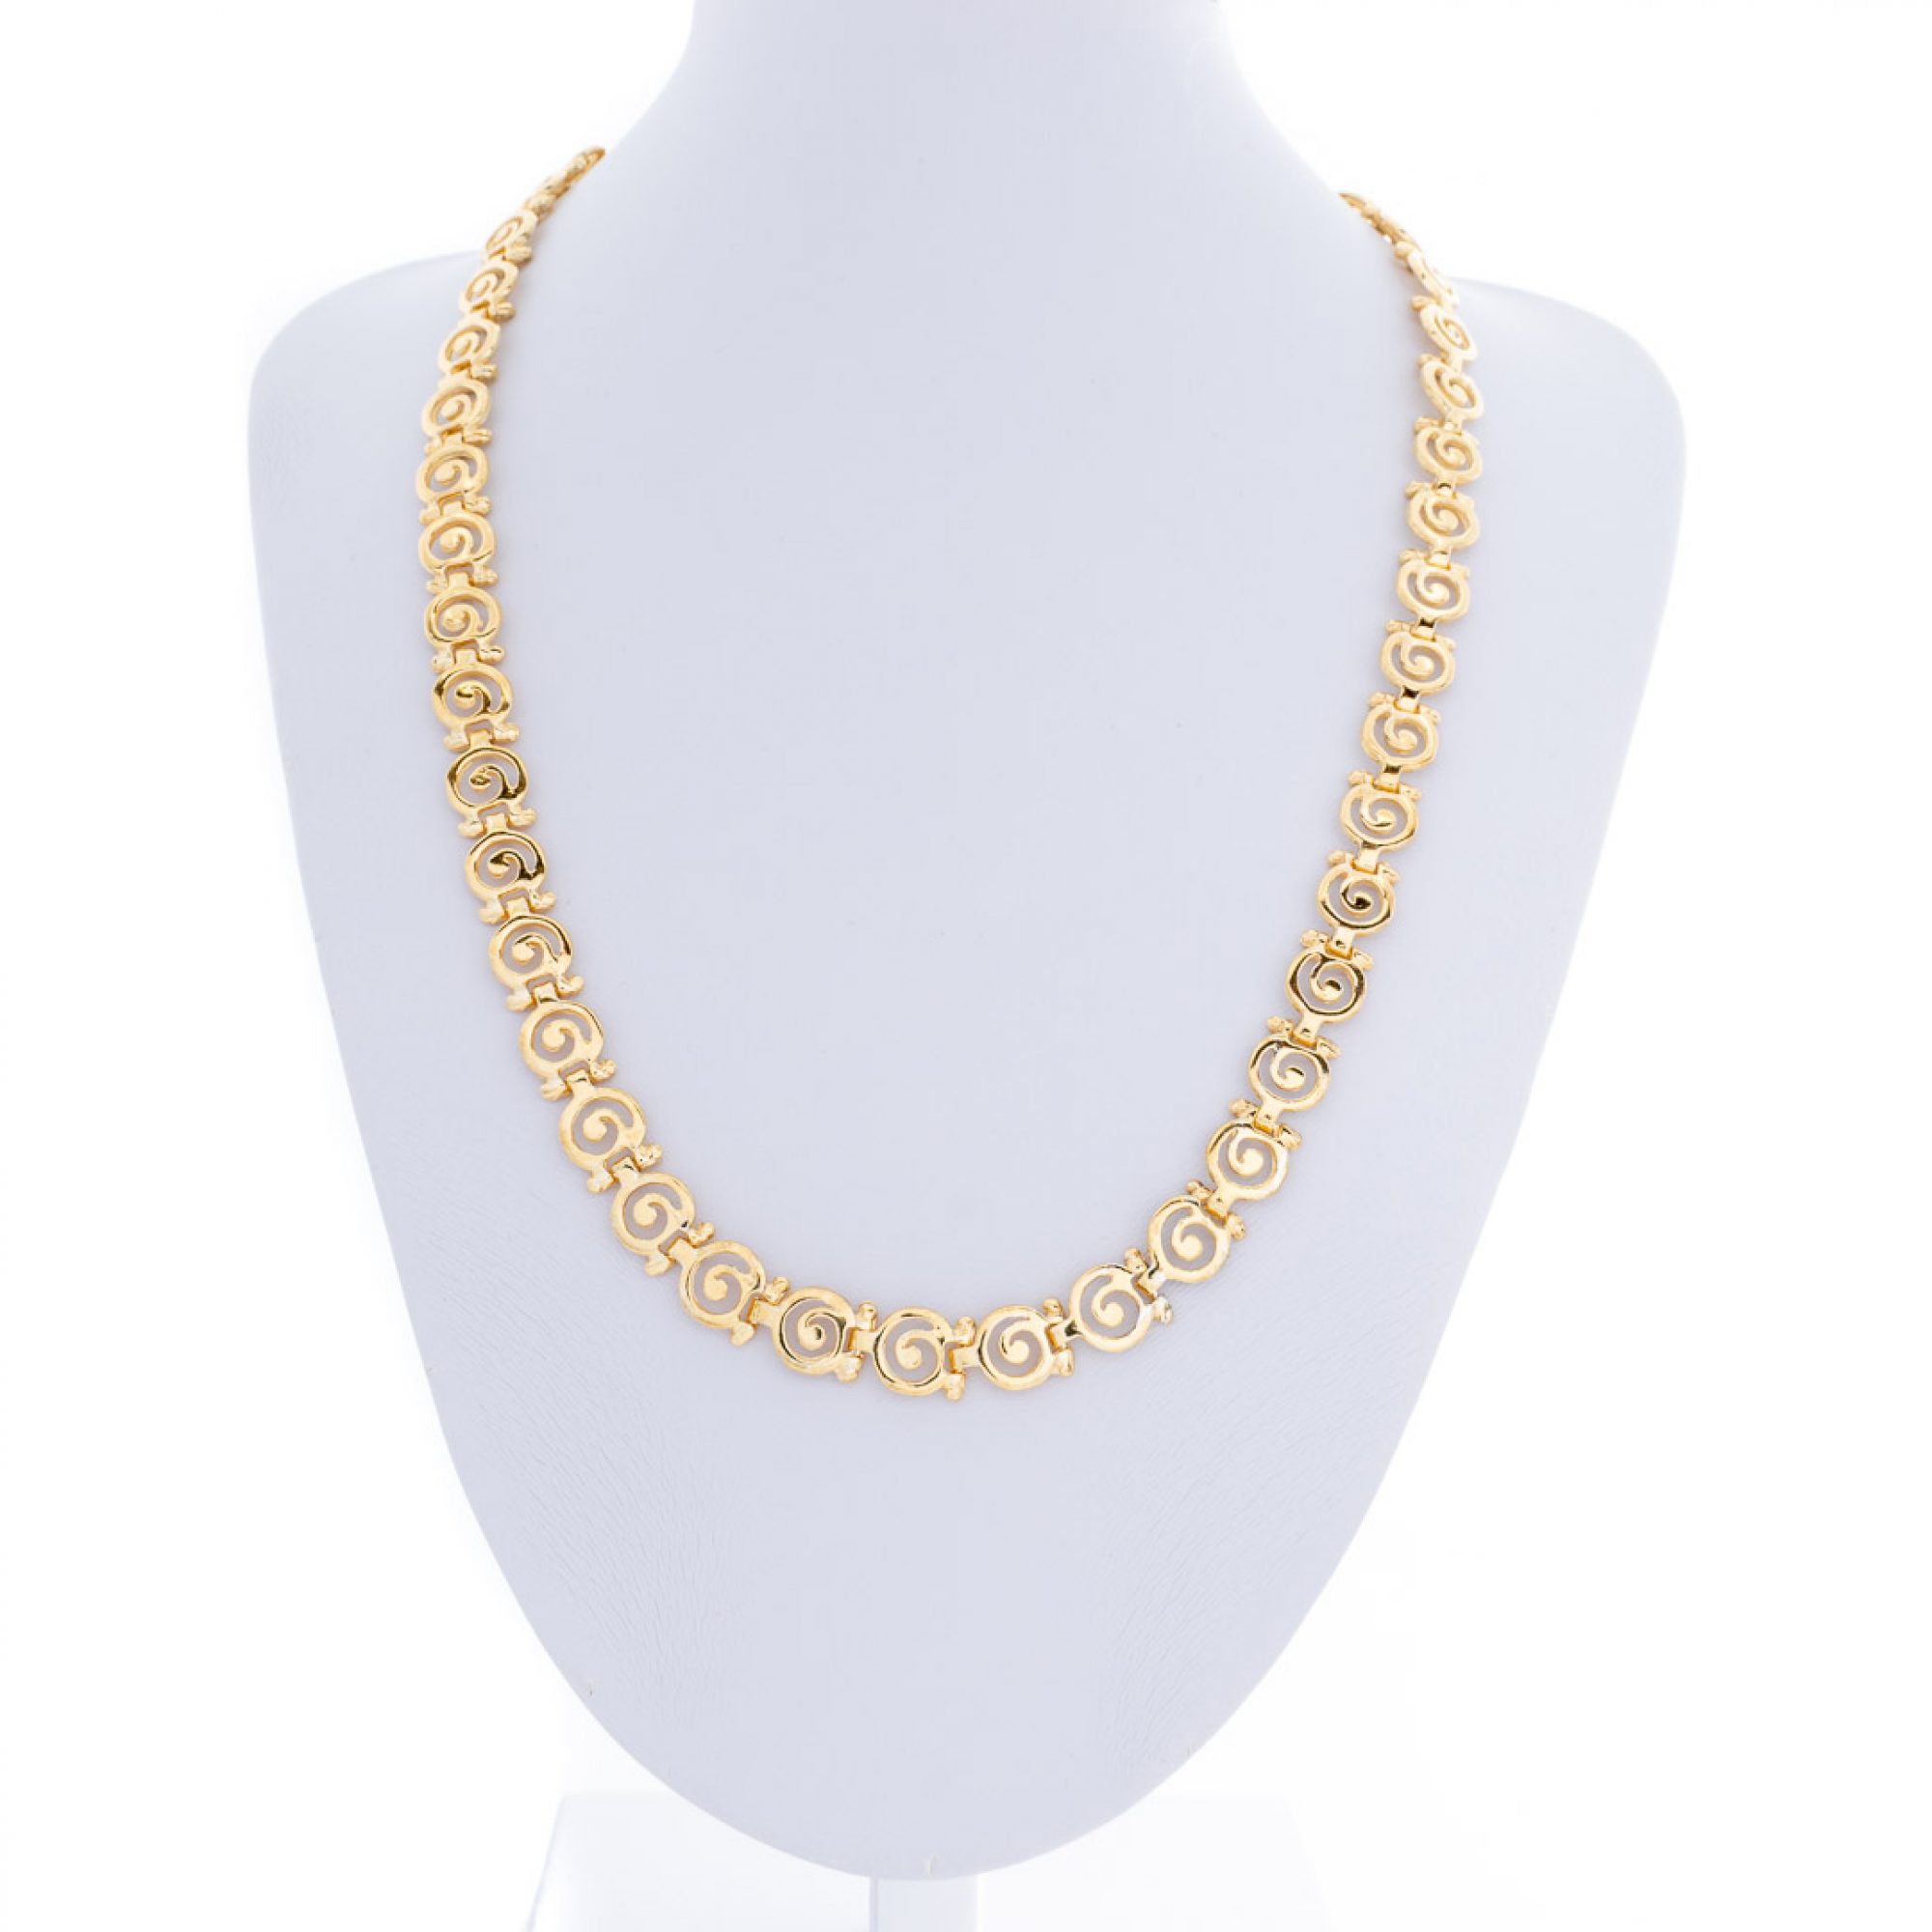 Gold plated meander necklace